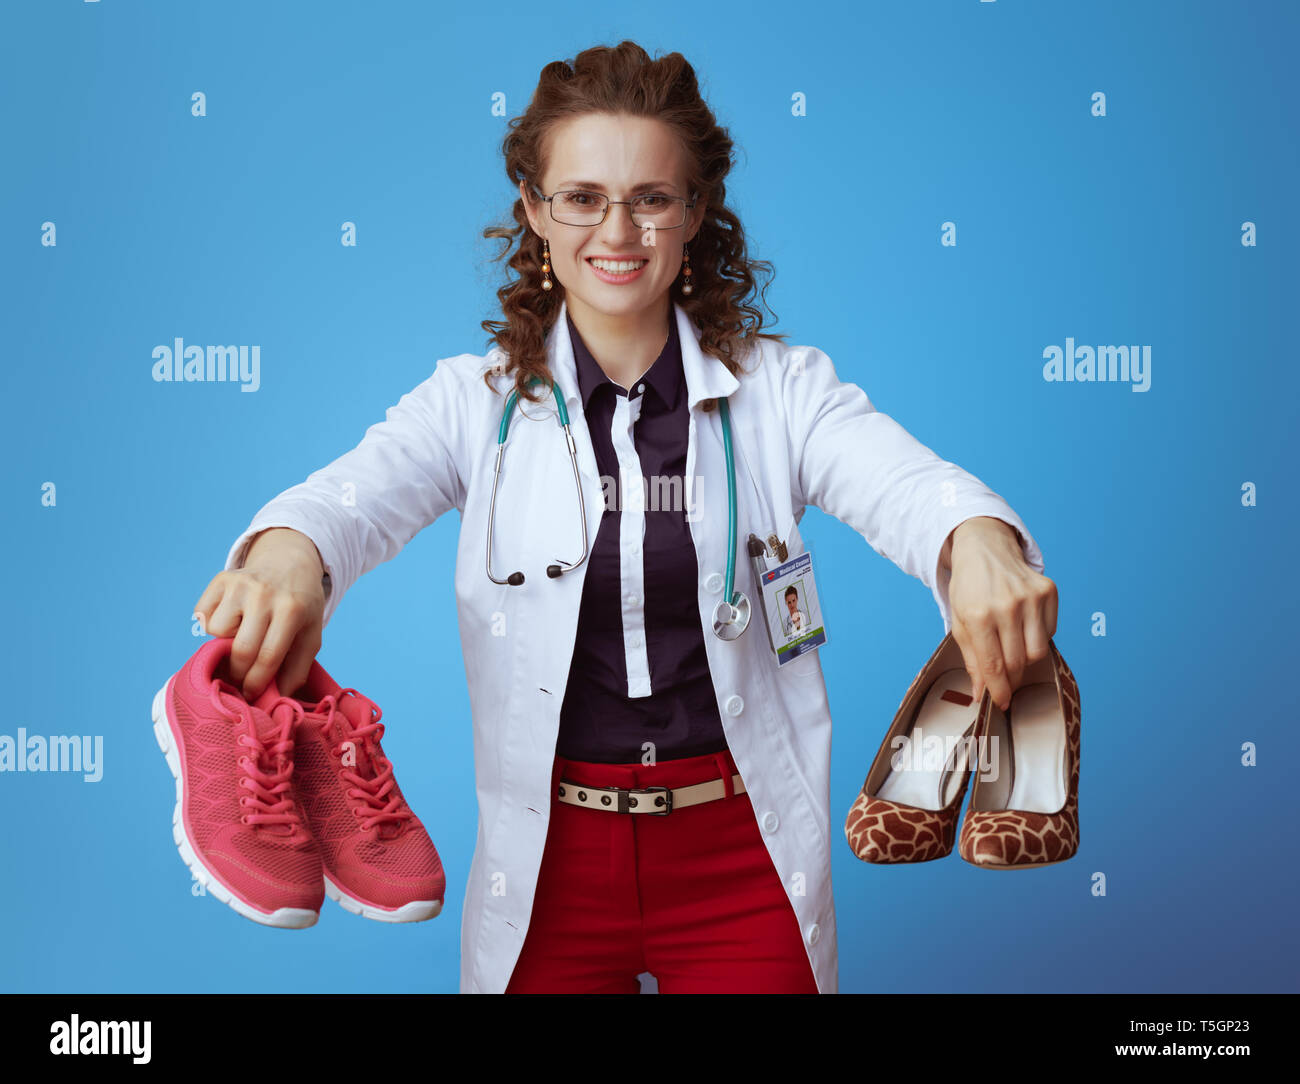 smiling modern medical practitioner woman in bue shirt, red pants and white medical robe showing fitness sneakers and high heel shoes against blue bac Stock Photo